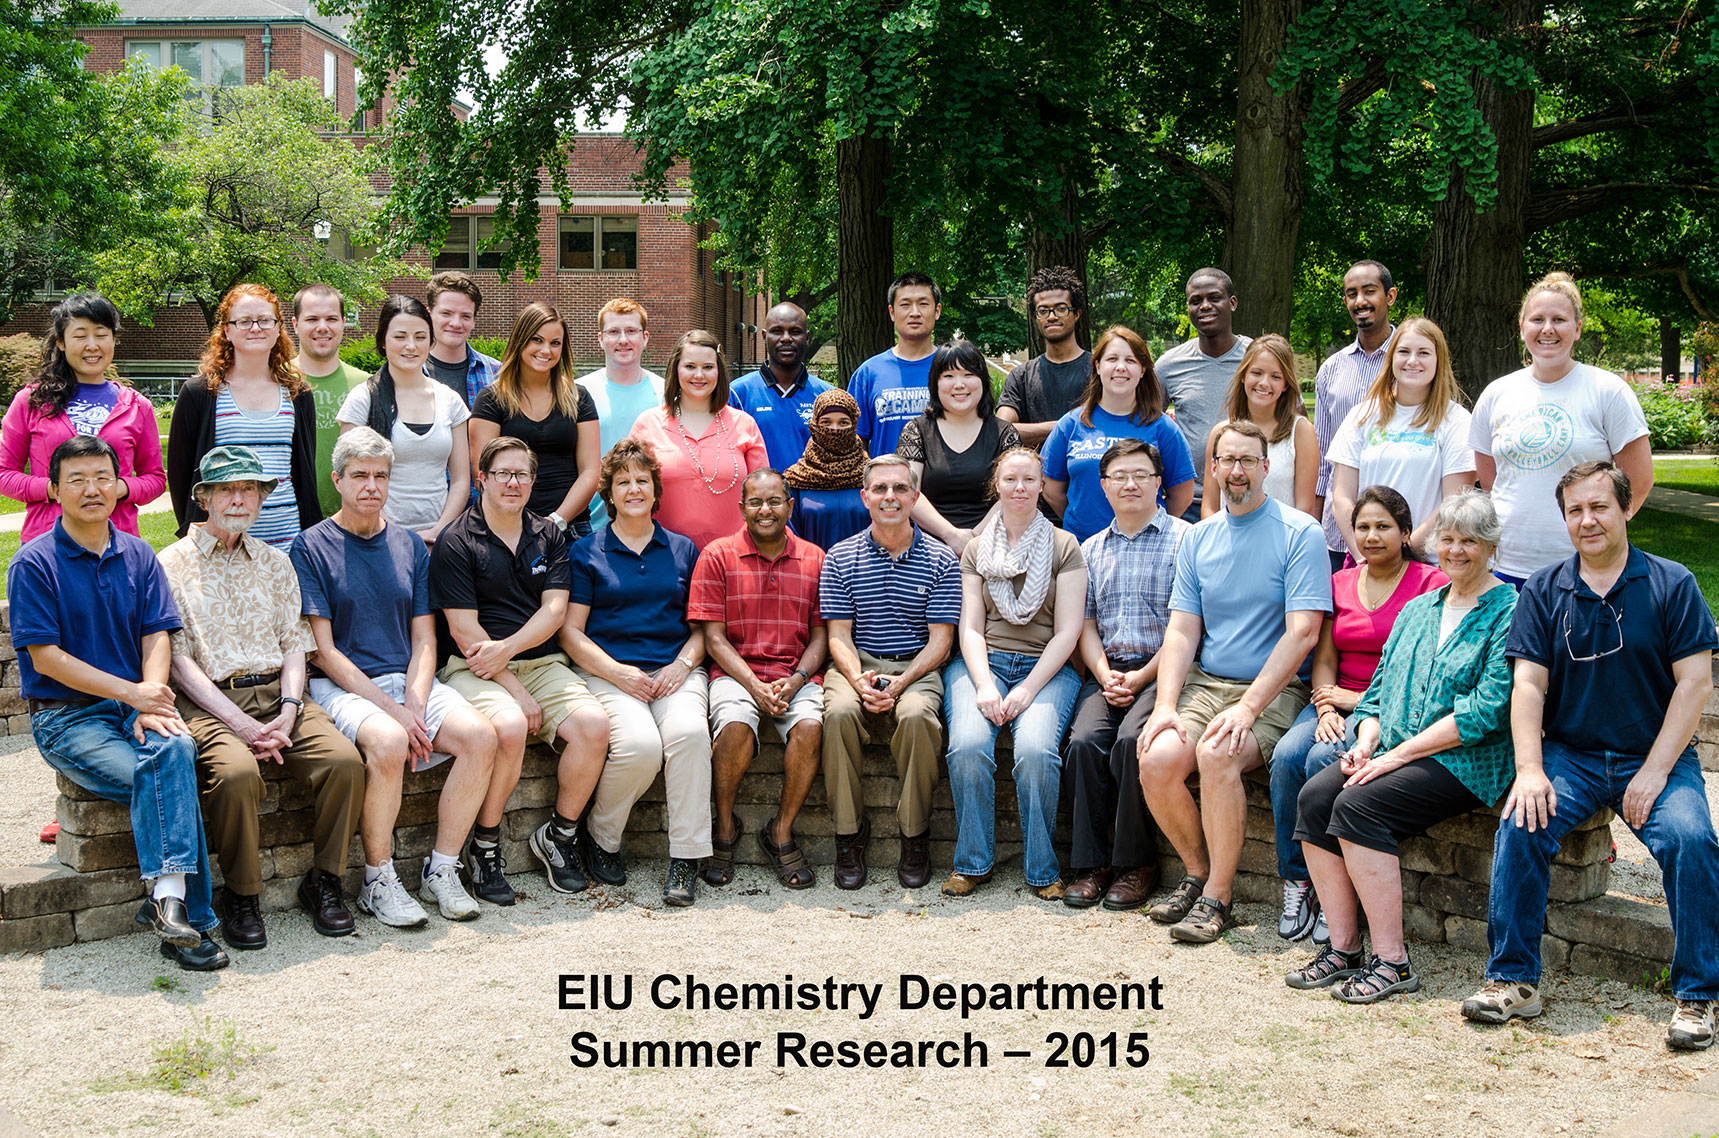 2015 Summer research group